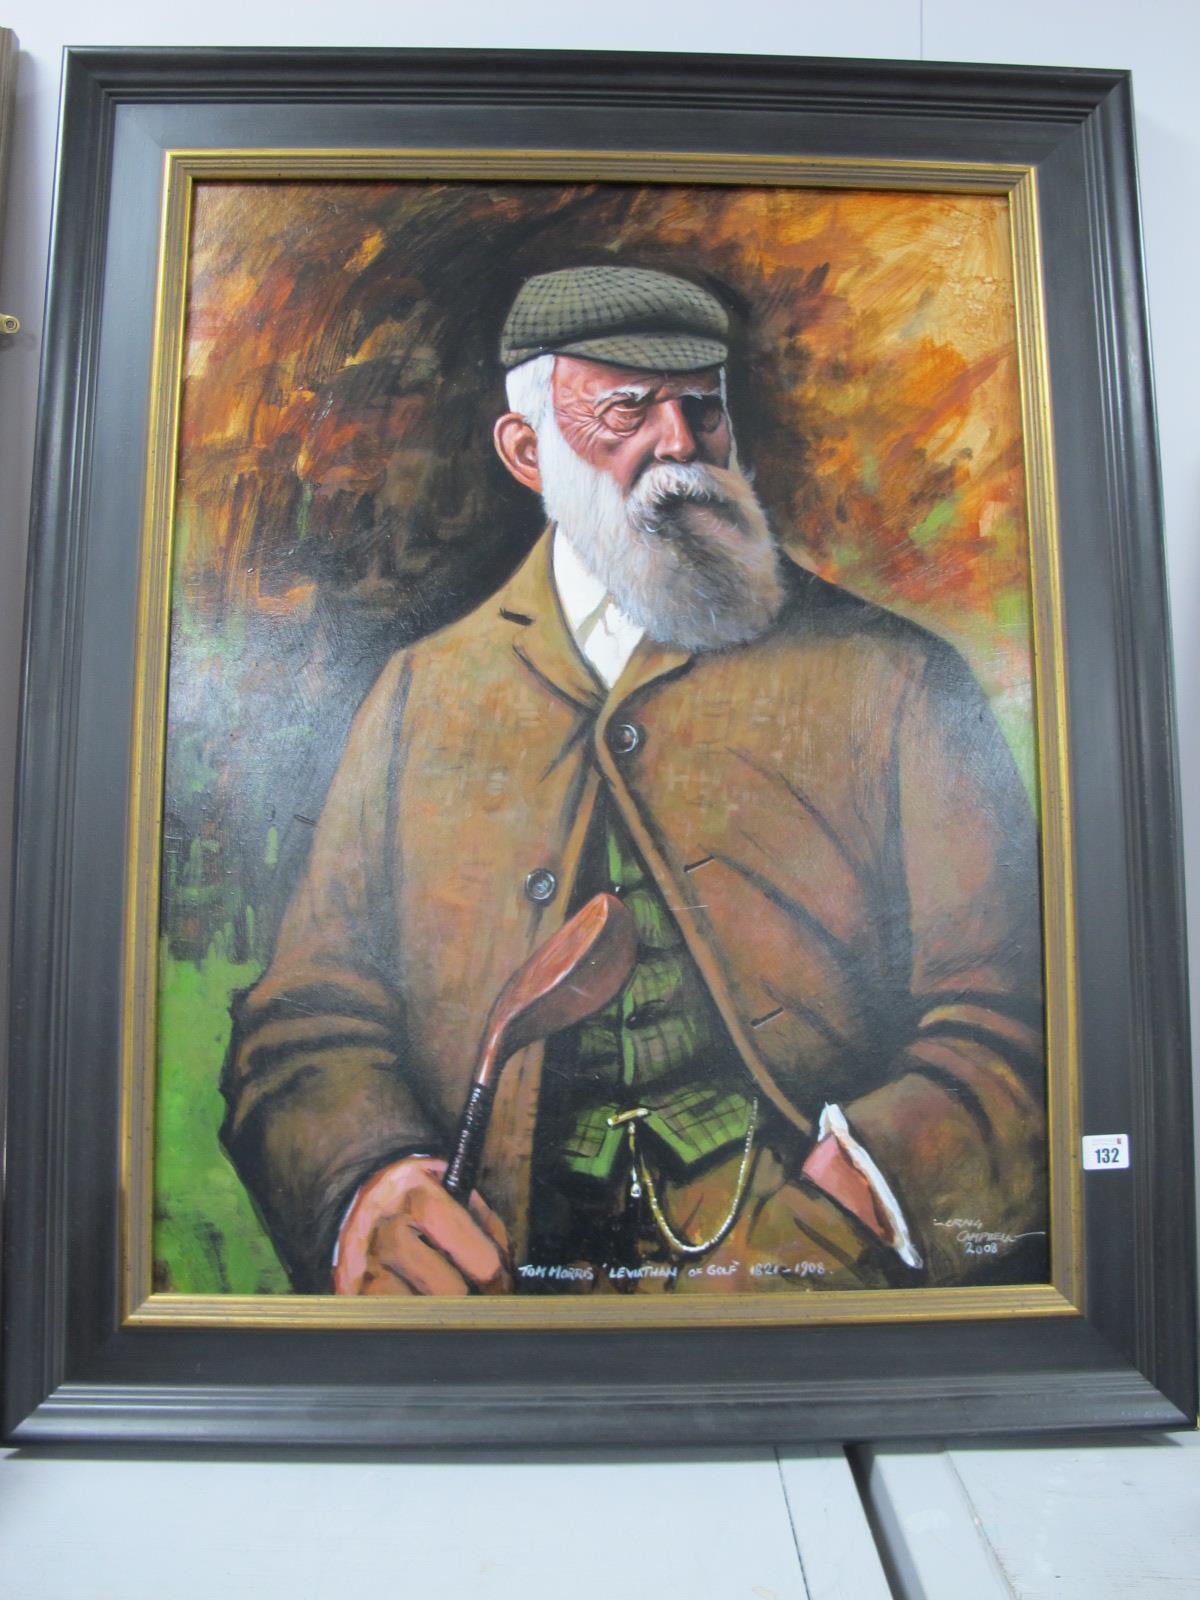 Golf - Craig Campbell 'Tom Morris, Leviathan of Golf, 1821 -1908' Portrait, oil on board, signed and